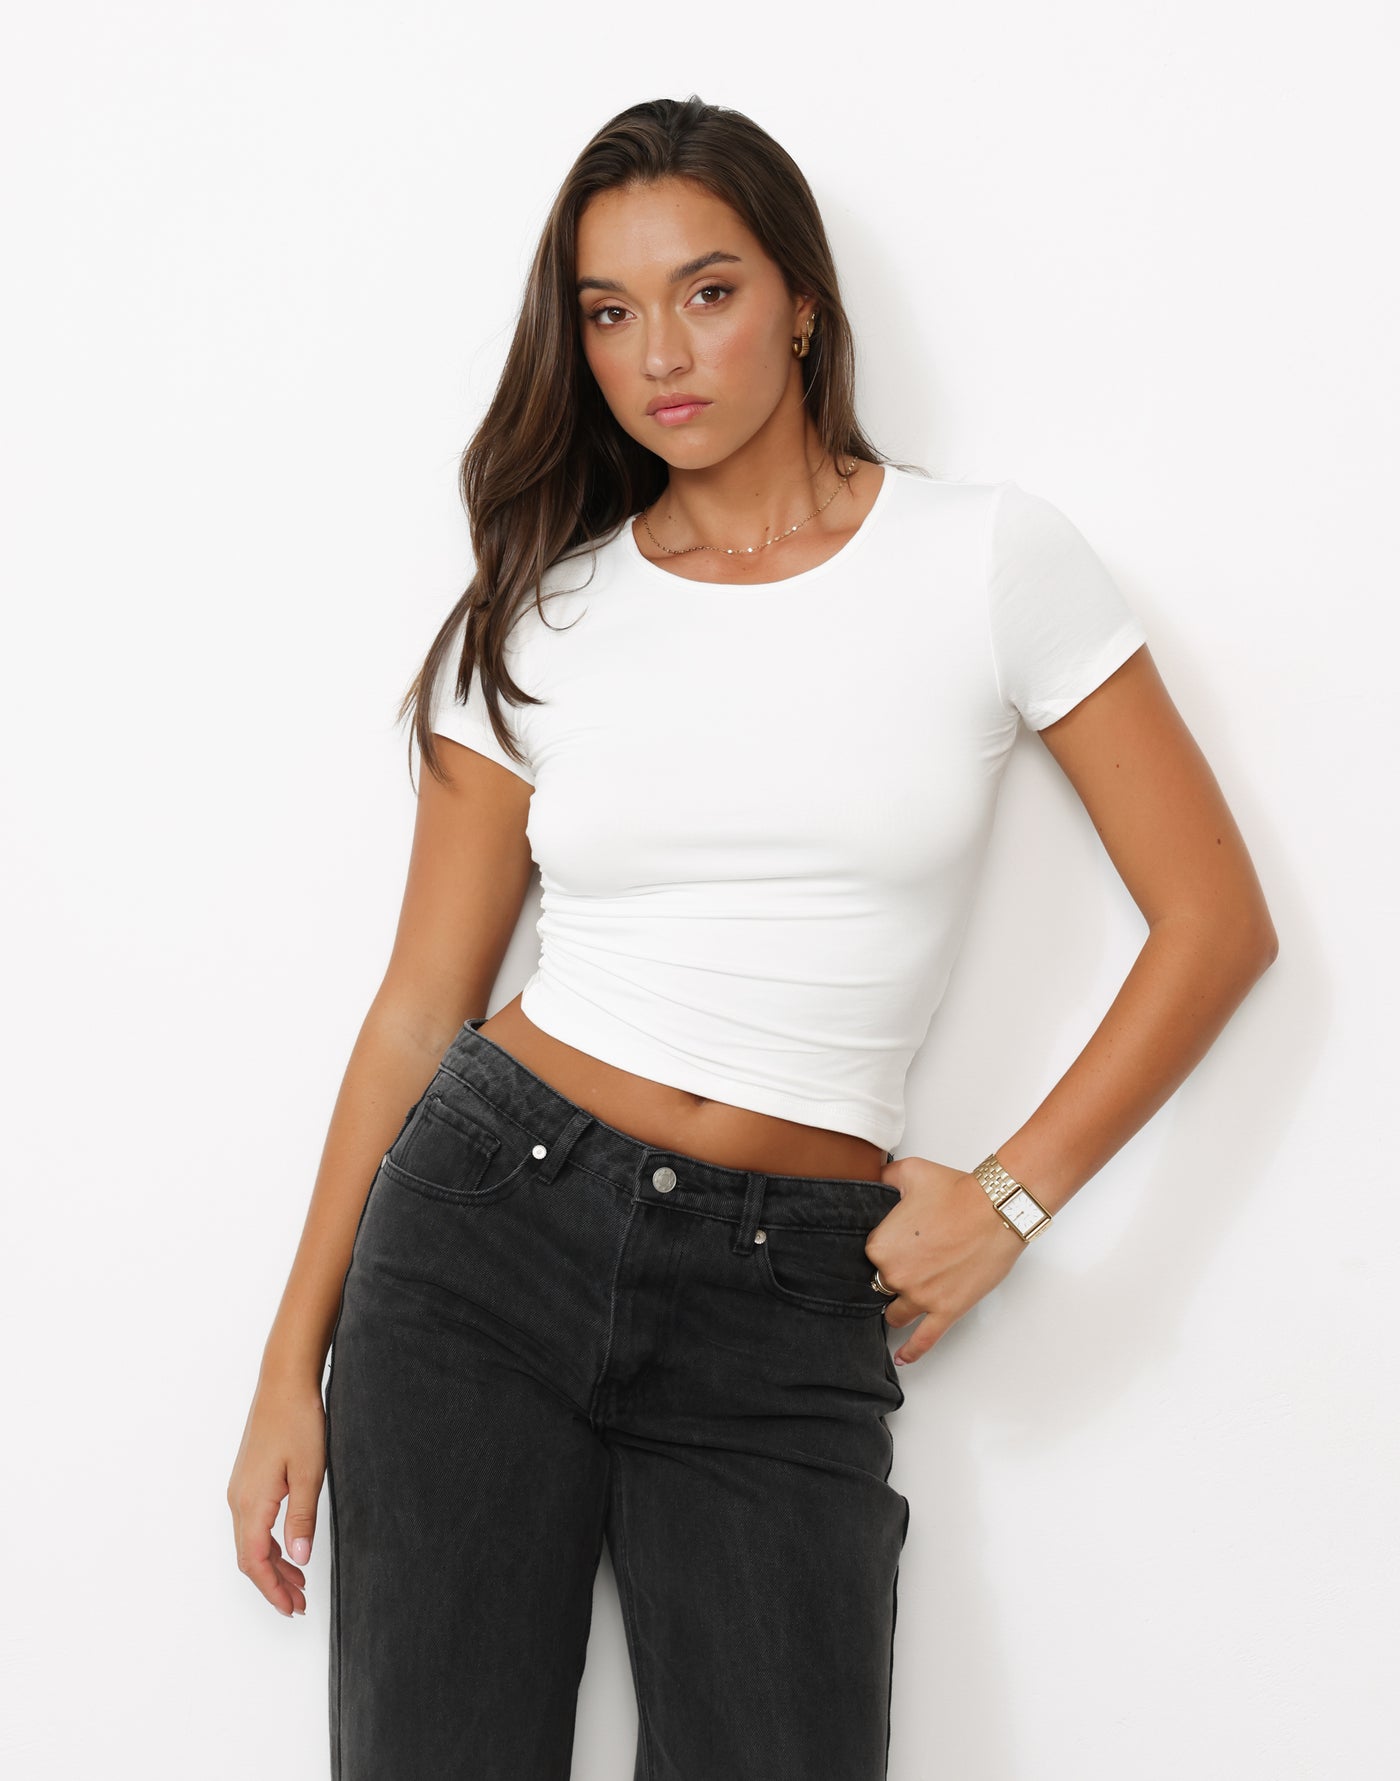 Kristyn Top (White) - Basic Fitted Short Sleeve Bodycon Top - Women's Top - Charcoal Clothing